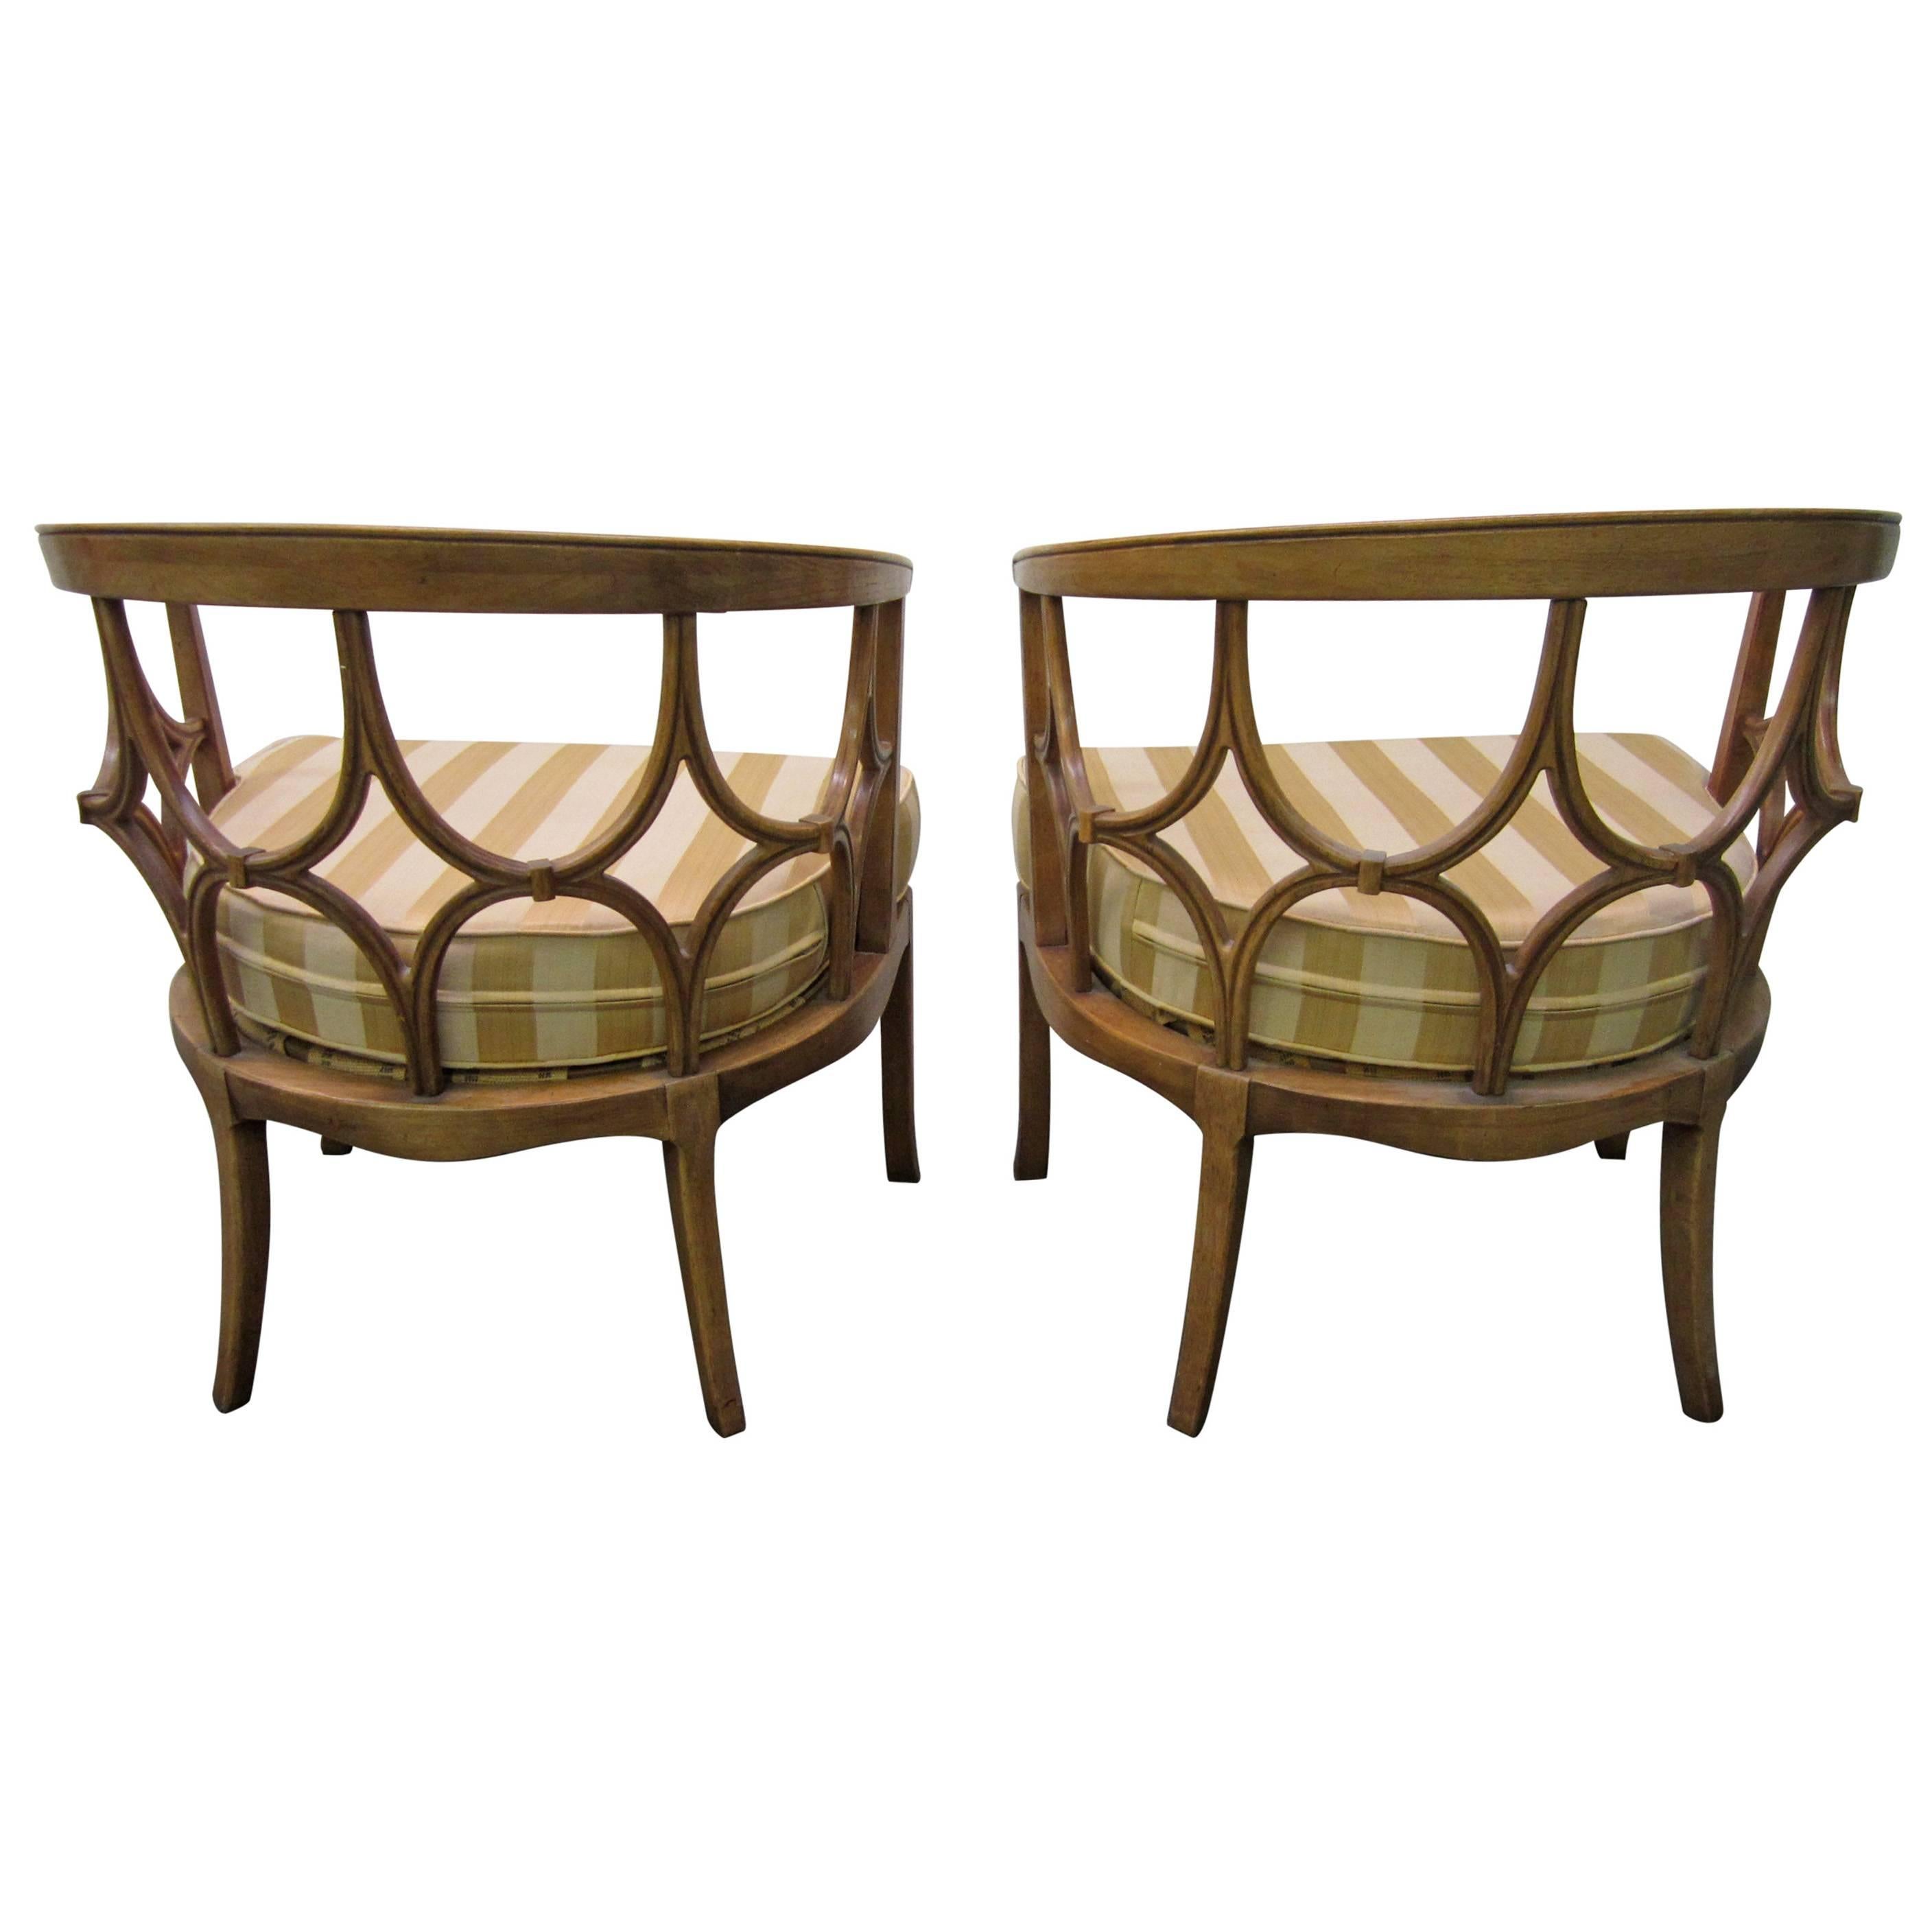 Amazing Pair of Billy Haines Barrel Back Chairs, Regency Modern For Sale